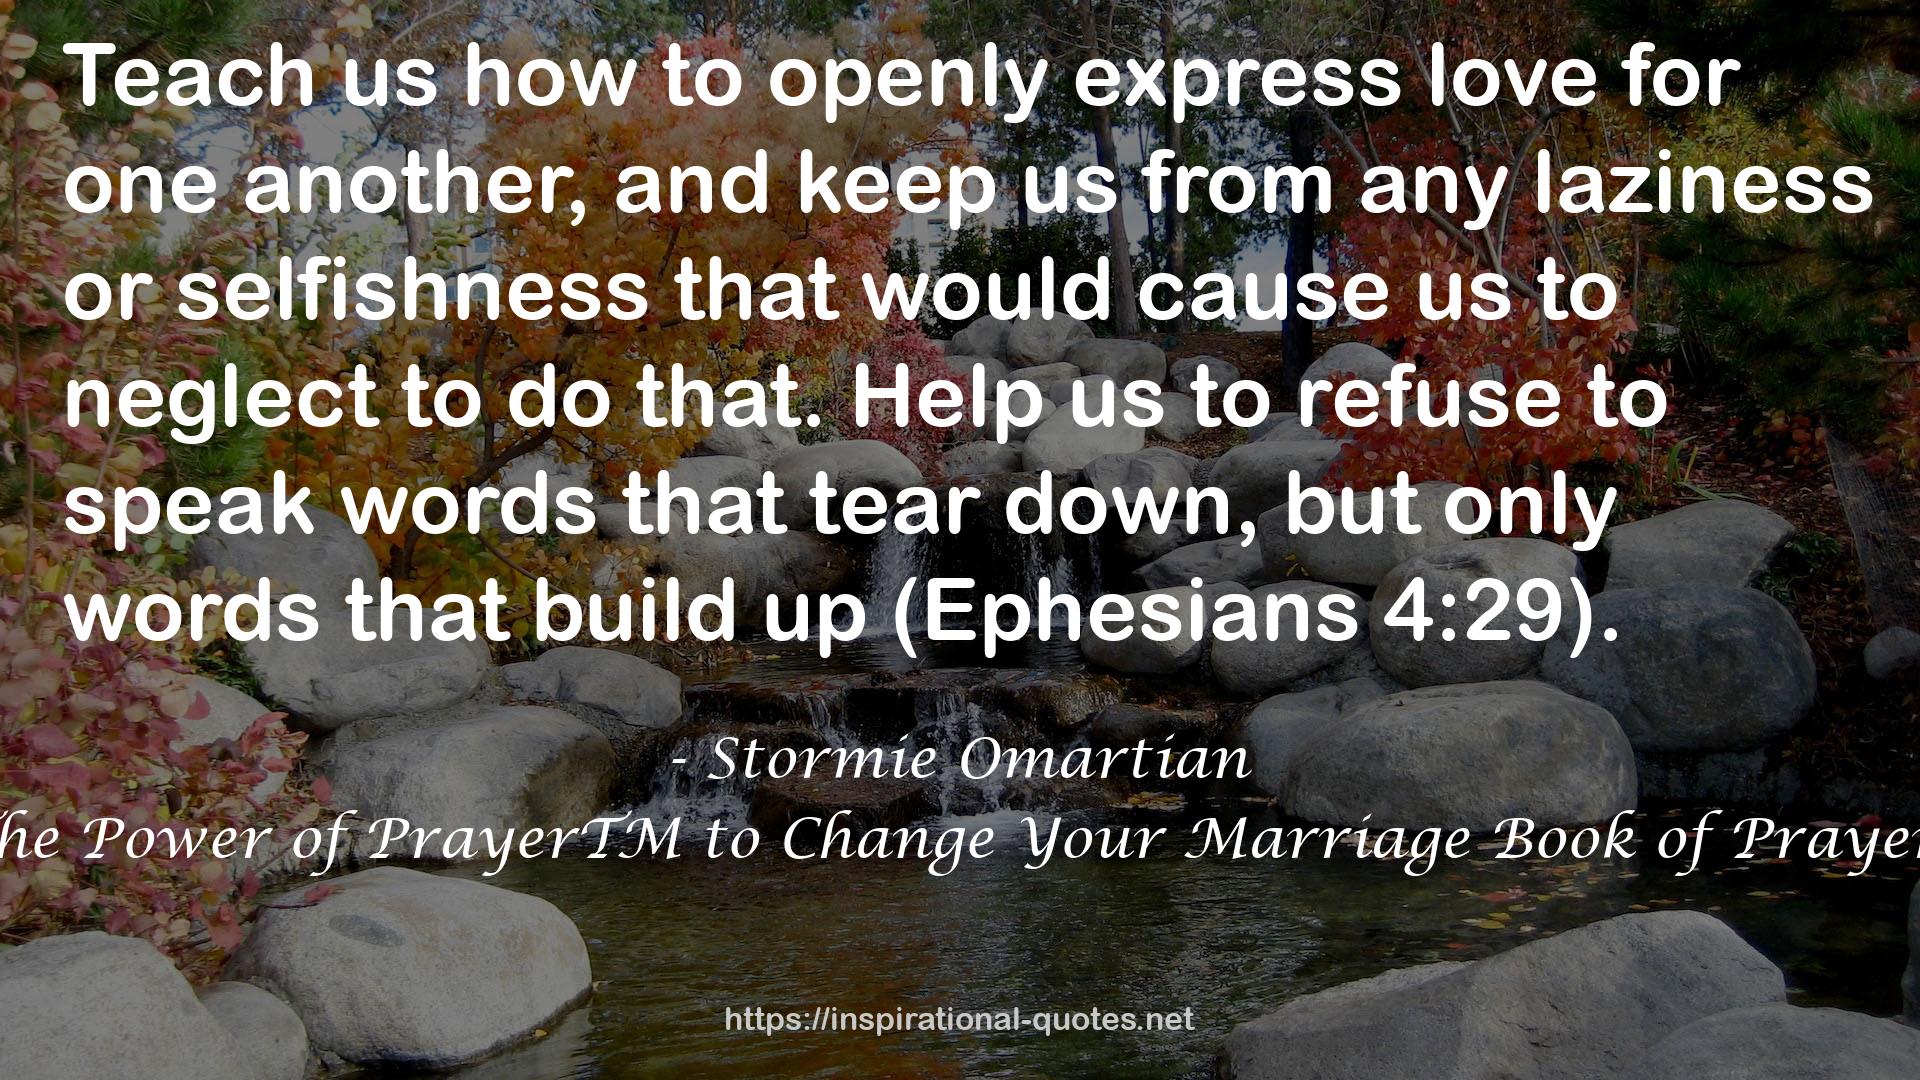 The Power of PrayerTM to Change Your Marriage Book of Prayers QUOTES